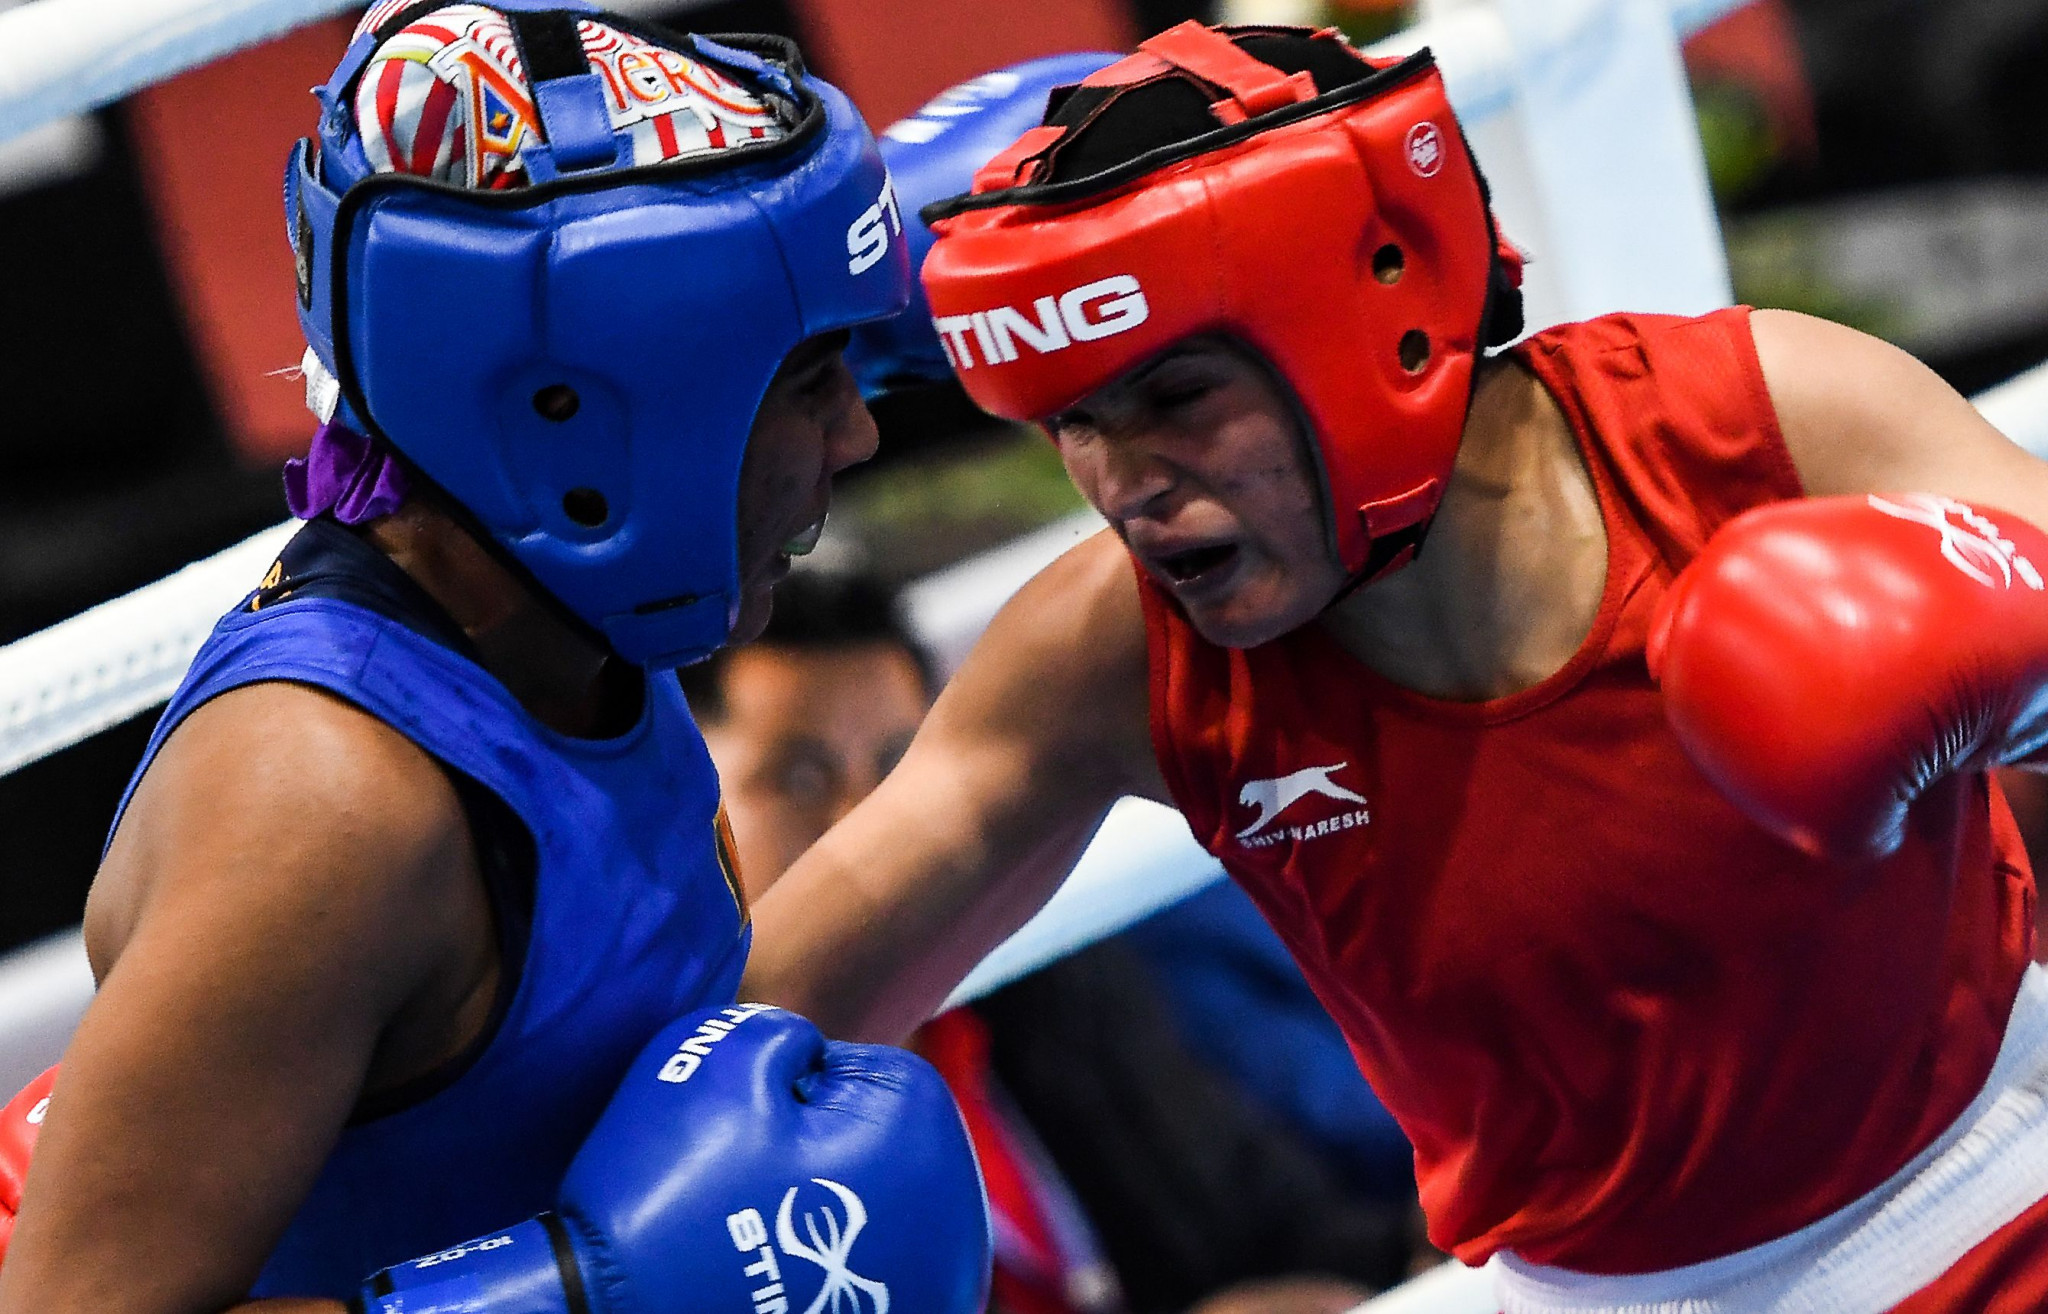 Chandra Kala Thapa, right, is one of Nepal's brightest boxing hopes after appearing at this year's World Championships ©Getty Images